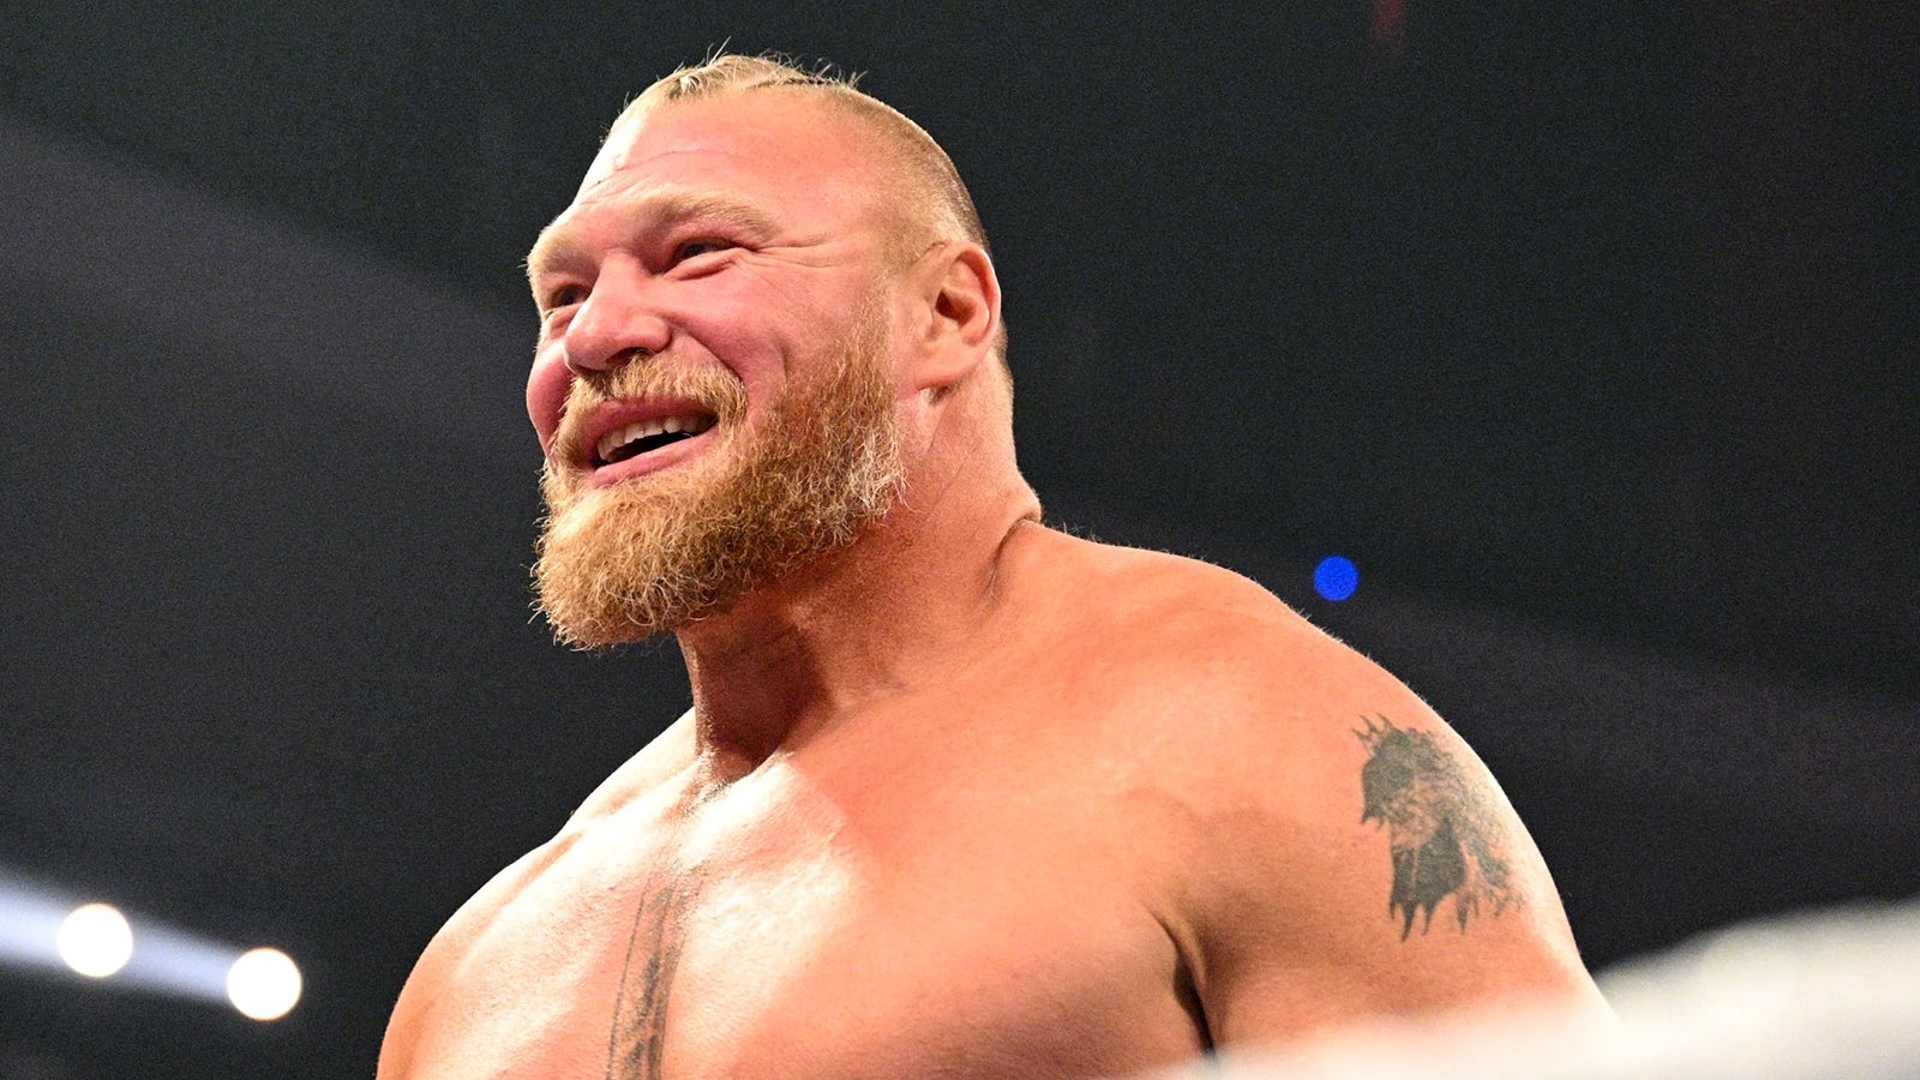 Former UFC Heavyweight champion Brock Lesnar unlikely to make surprise